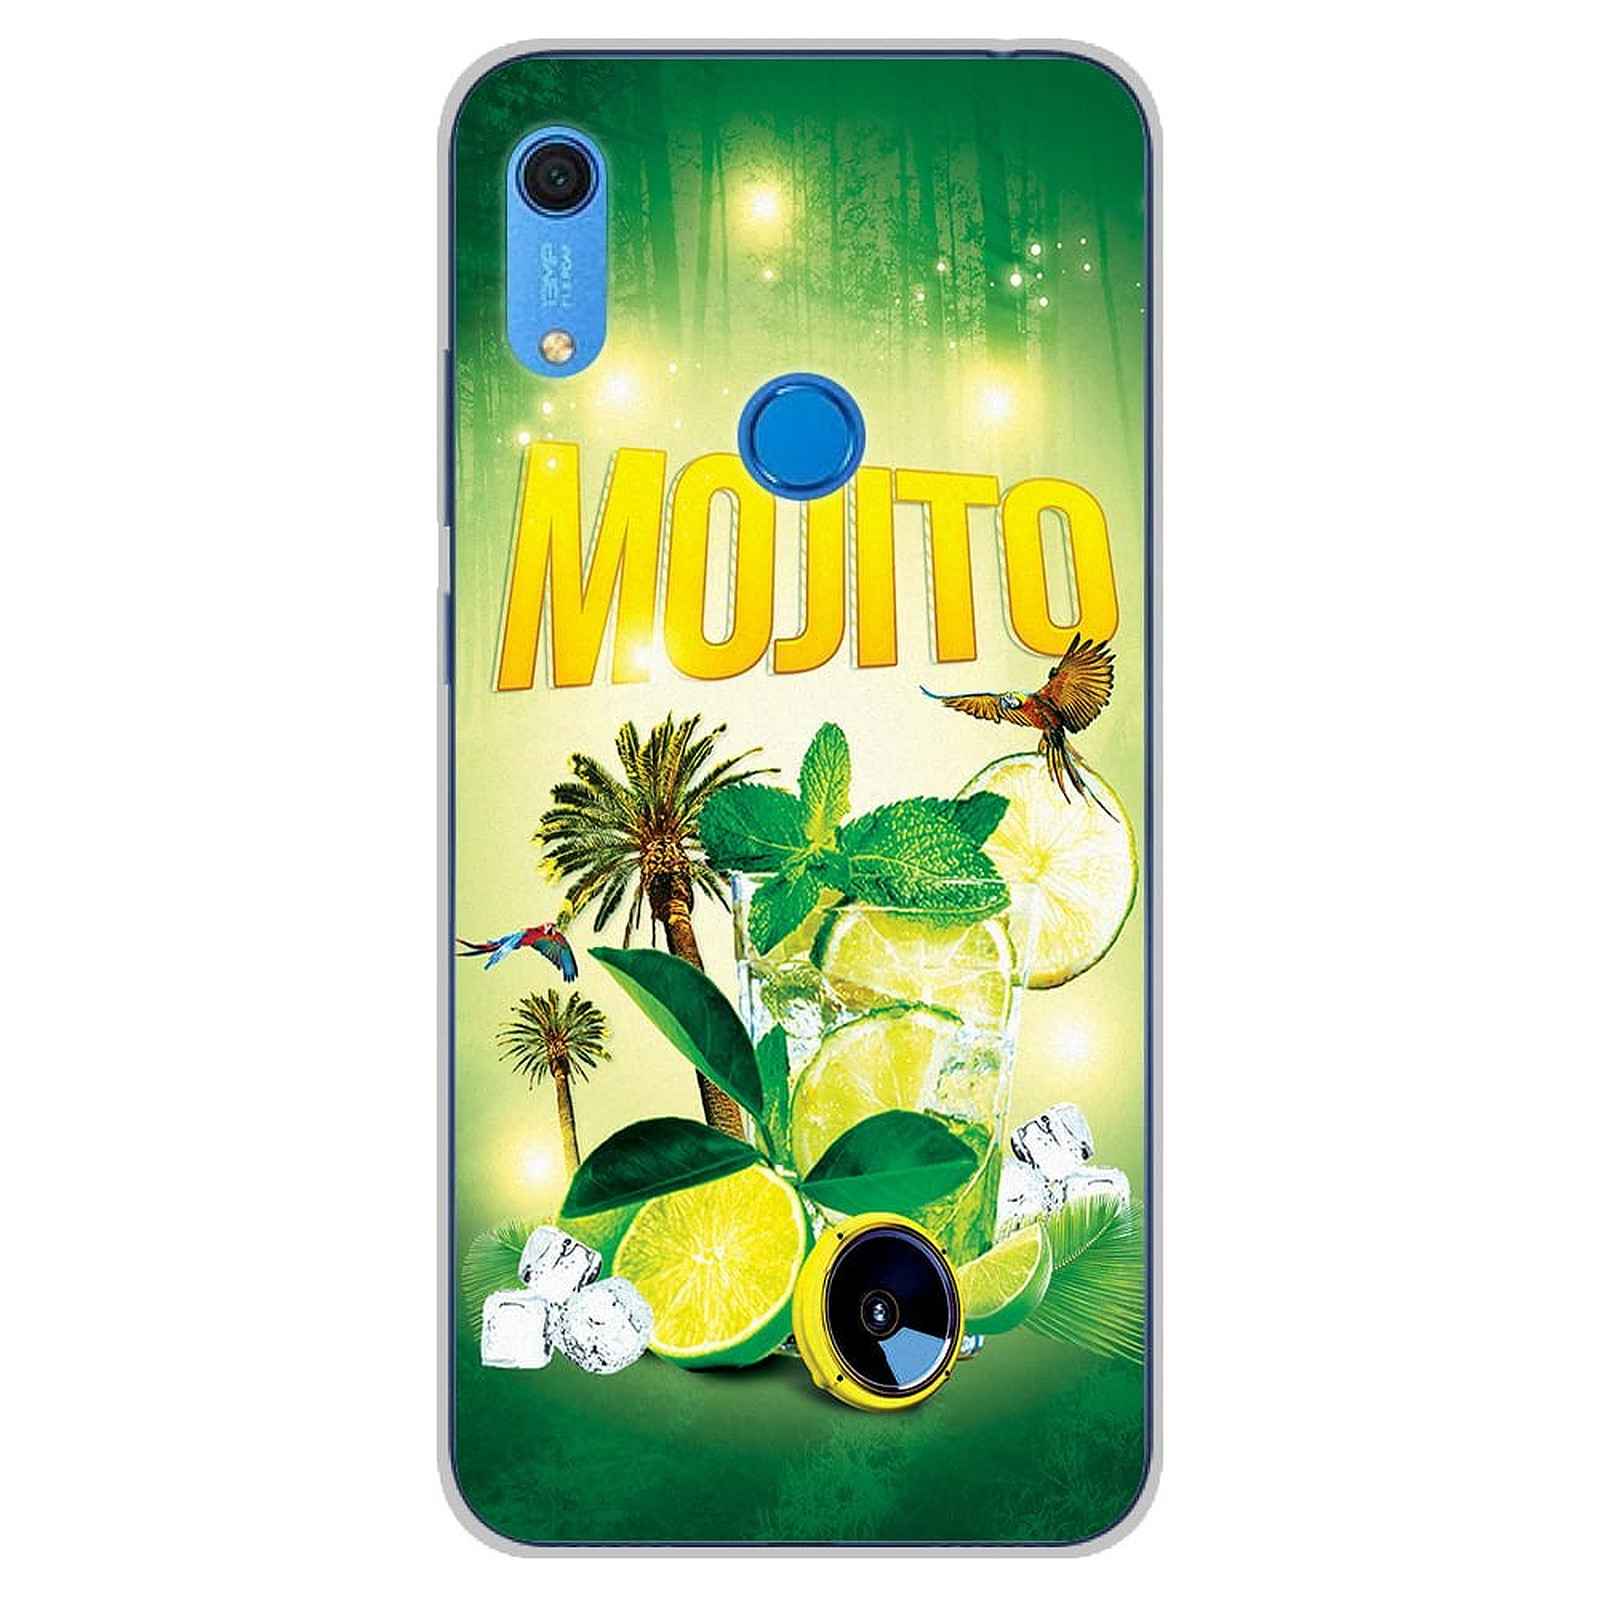 1001 Coques Coque silicone gel Huawei Y6S motif Mojito Foret - Coque telephone 1001Coques